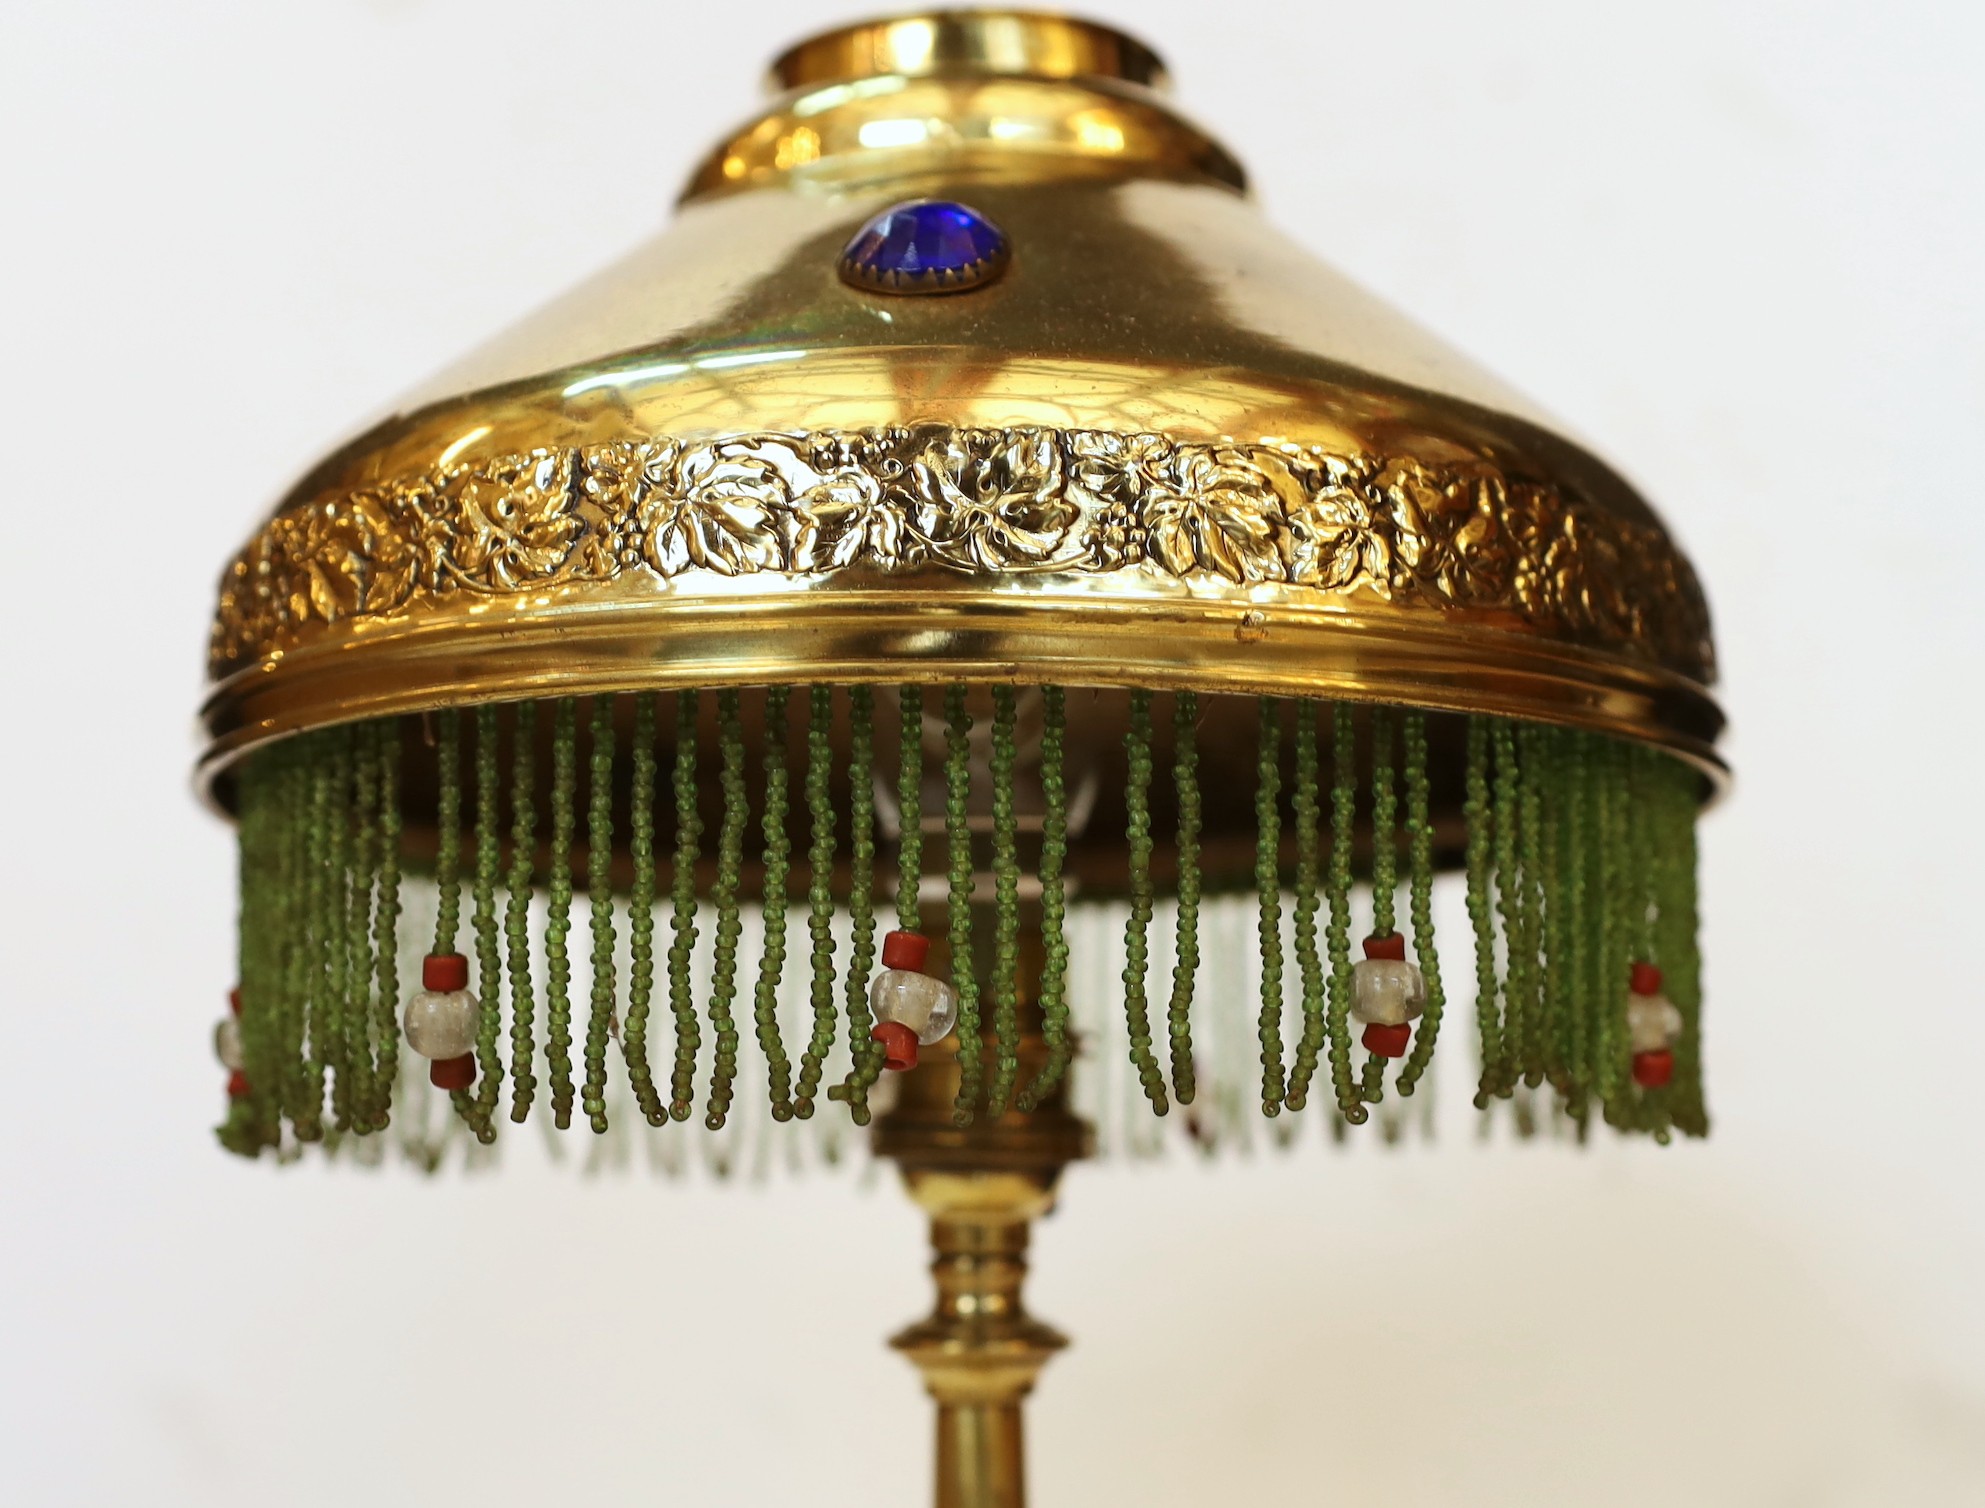 An early 20th century English brass table lamp, the jewelled shade with glass bead fringe, height 45cm